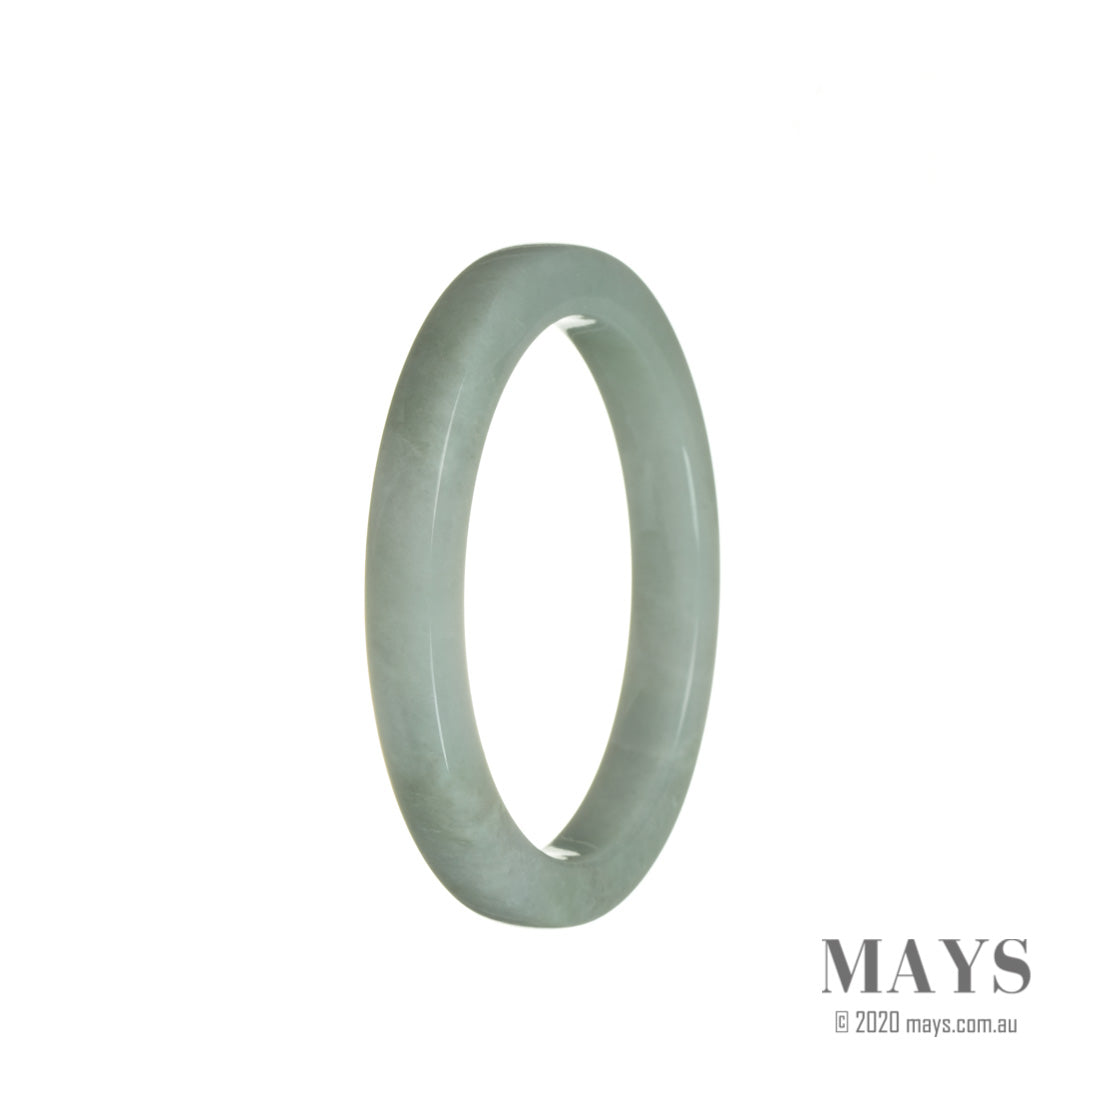 A close-up image of a thin white jade bracelet made of genuine Type A white jadeite jade, measuring 56mm in diameter. The bracelet has a smooth and polished surface, with a delicate and elegant design. It is a beautiful piece of jewelry from MAYS GEMS.